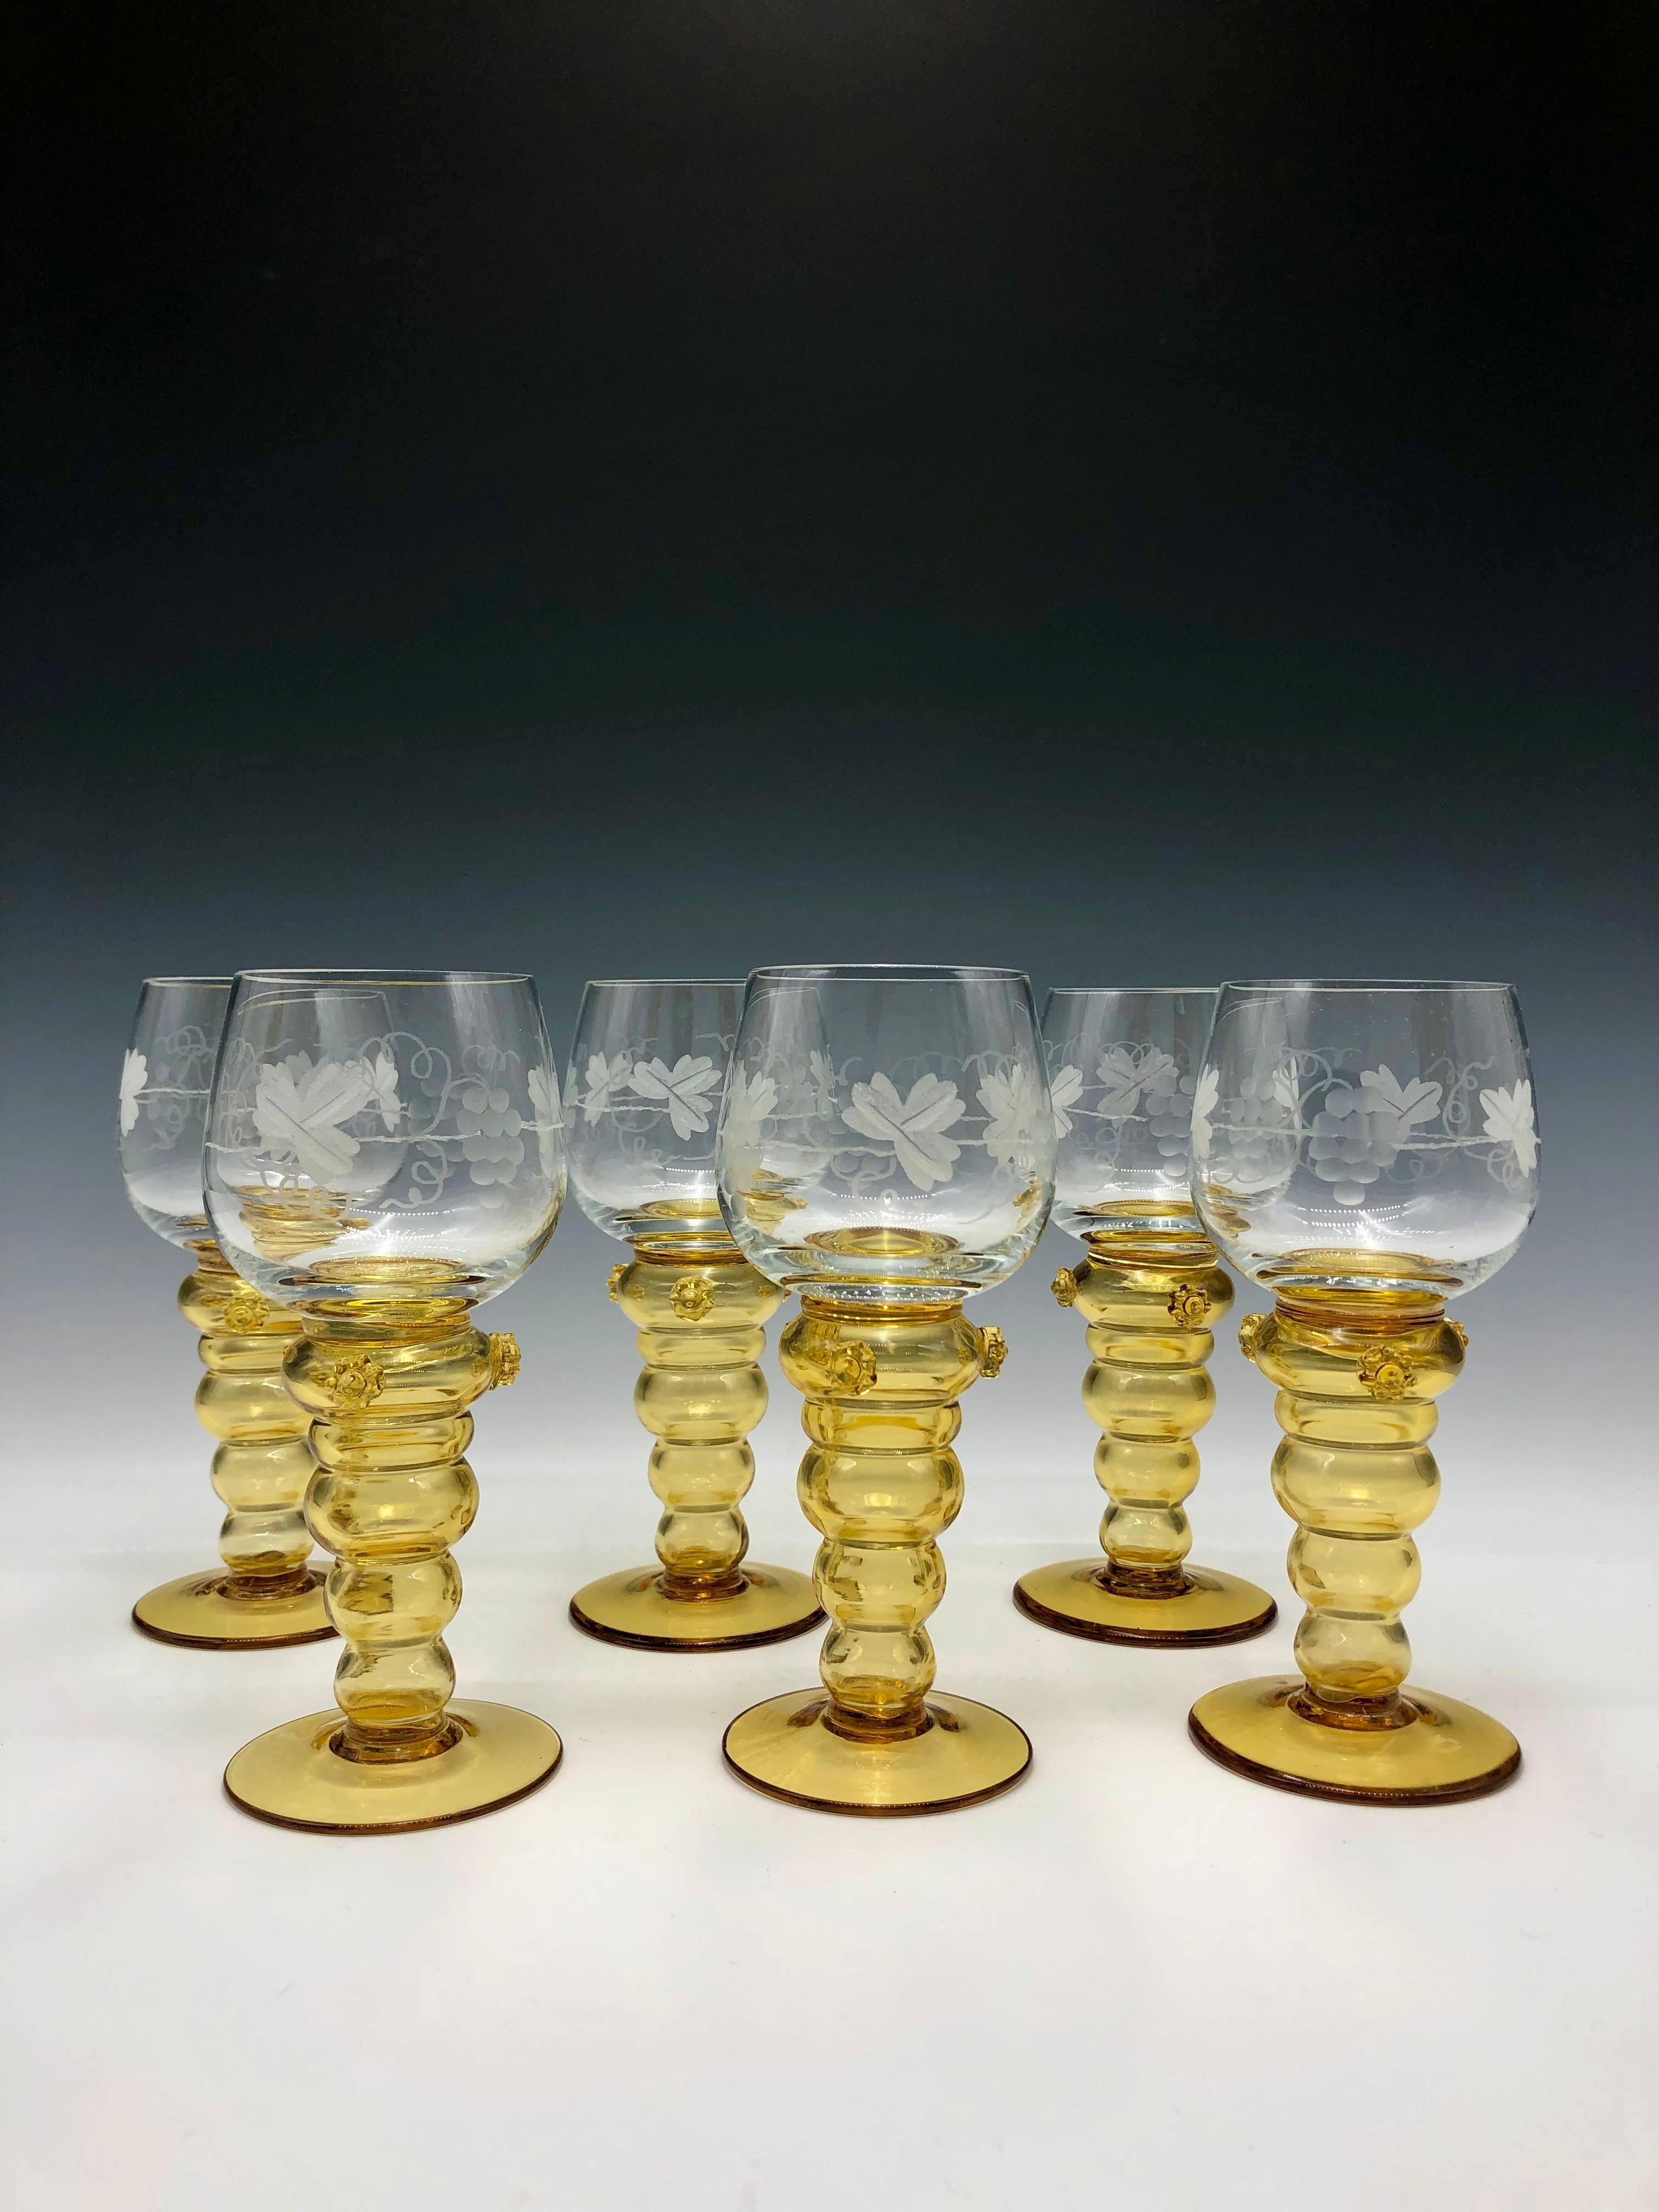 Set of six hand-blown decorative Theresienthal Roemer wine hock/glasses manufactured in Germany between 1880-1900. The clear glass is decorated with etched grapes, leaves & vines. The amber glass stems include three applied daisy-shaped glass punts